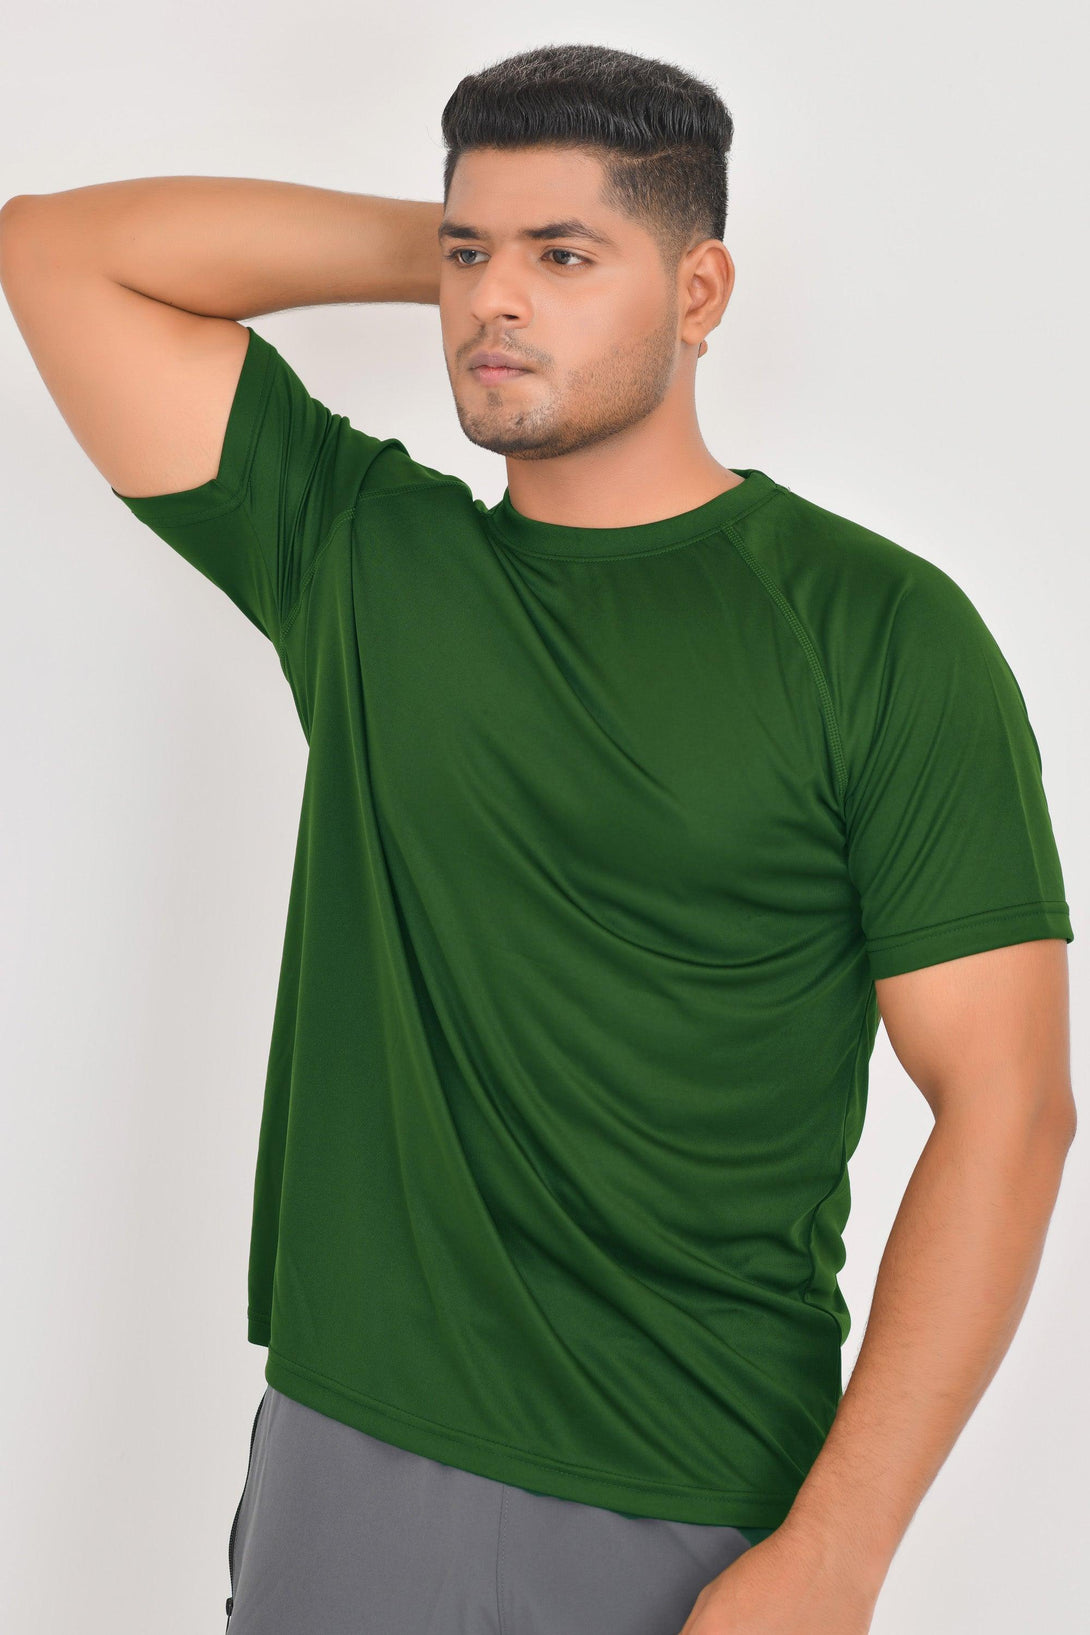 Performance T-Shirts | GREEN - NAVY - BLACK Pack of 3 - FTS